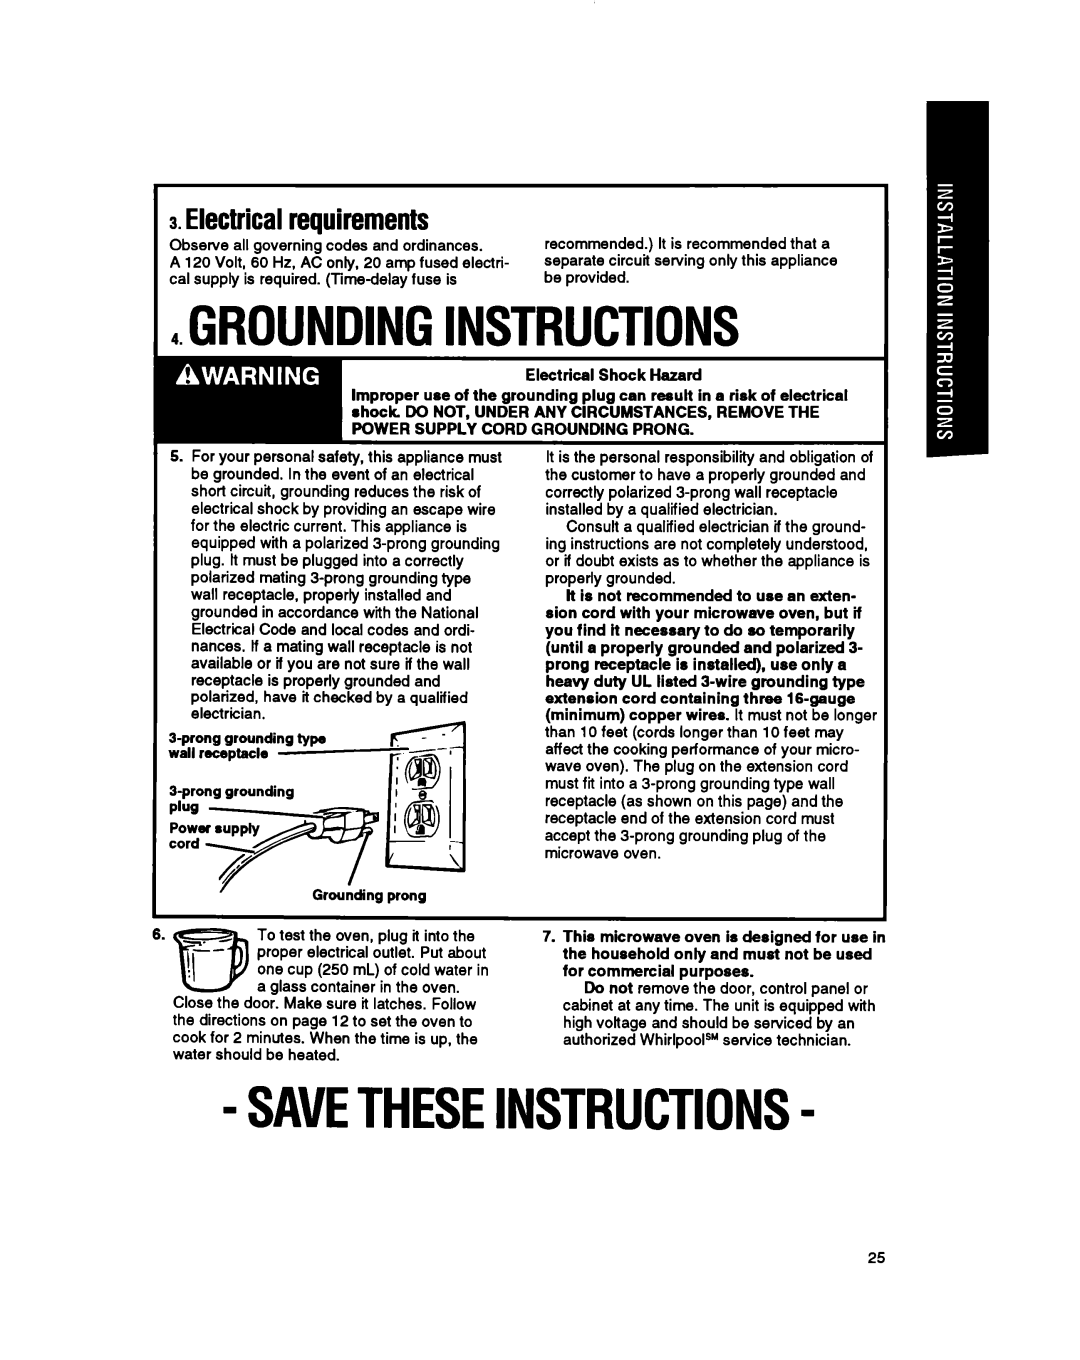 Whirlpool MT6901XW, MT6120XY, MT69OOXW manual 4GROUNDING.INSTRUCTIONS, Savetheseinstructions, Electricalrequirements 